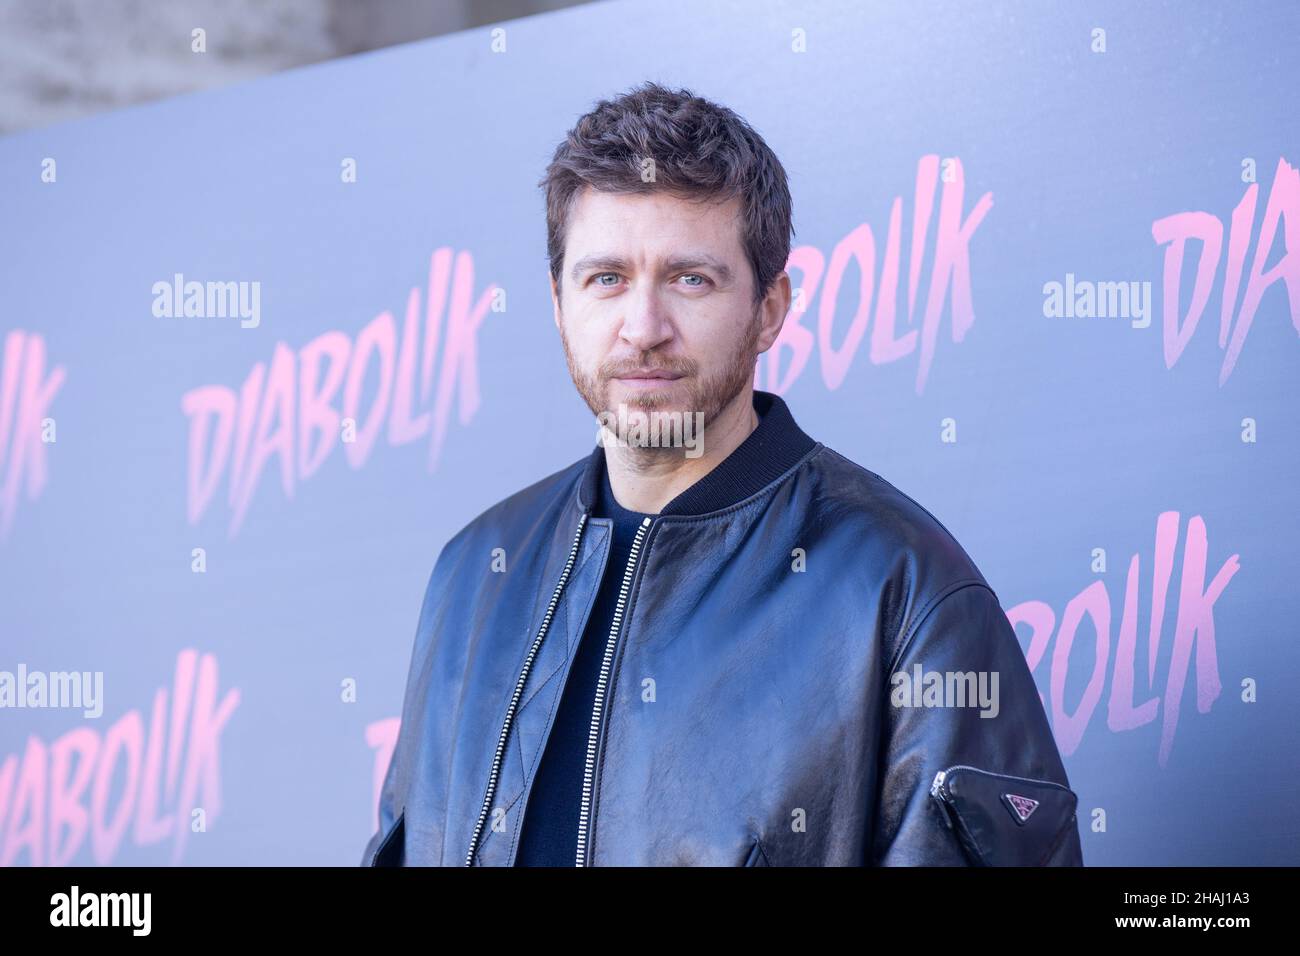 Rome, Italy. 13th Dec, 2021. Alessandro Roia attends photocall of film 'Diabolik' in Rome (Photo by Matteo Nardone/Pacific Press) Credit: Pacific Press Media Production Corp./Alamy Live News Stock Photo